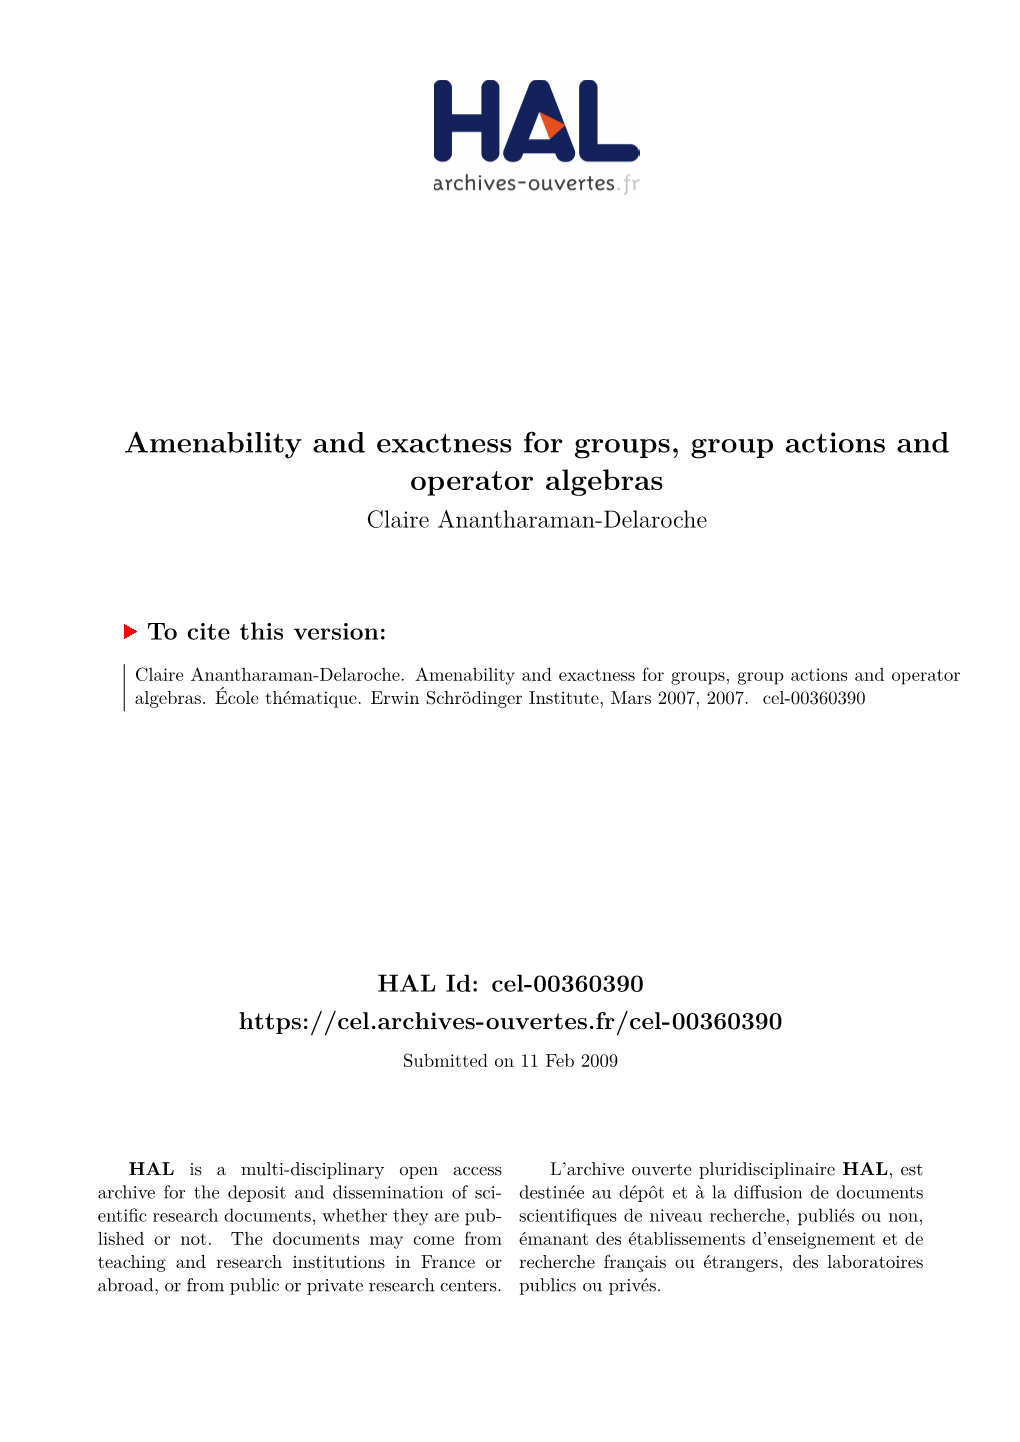 Amenability and Exactness for Groups, Group Actions and Operator Algebras Claire Anantharaman-Delaroche